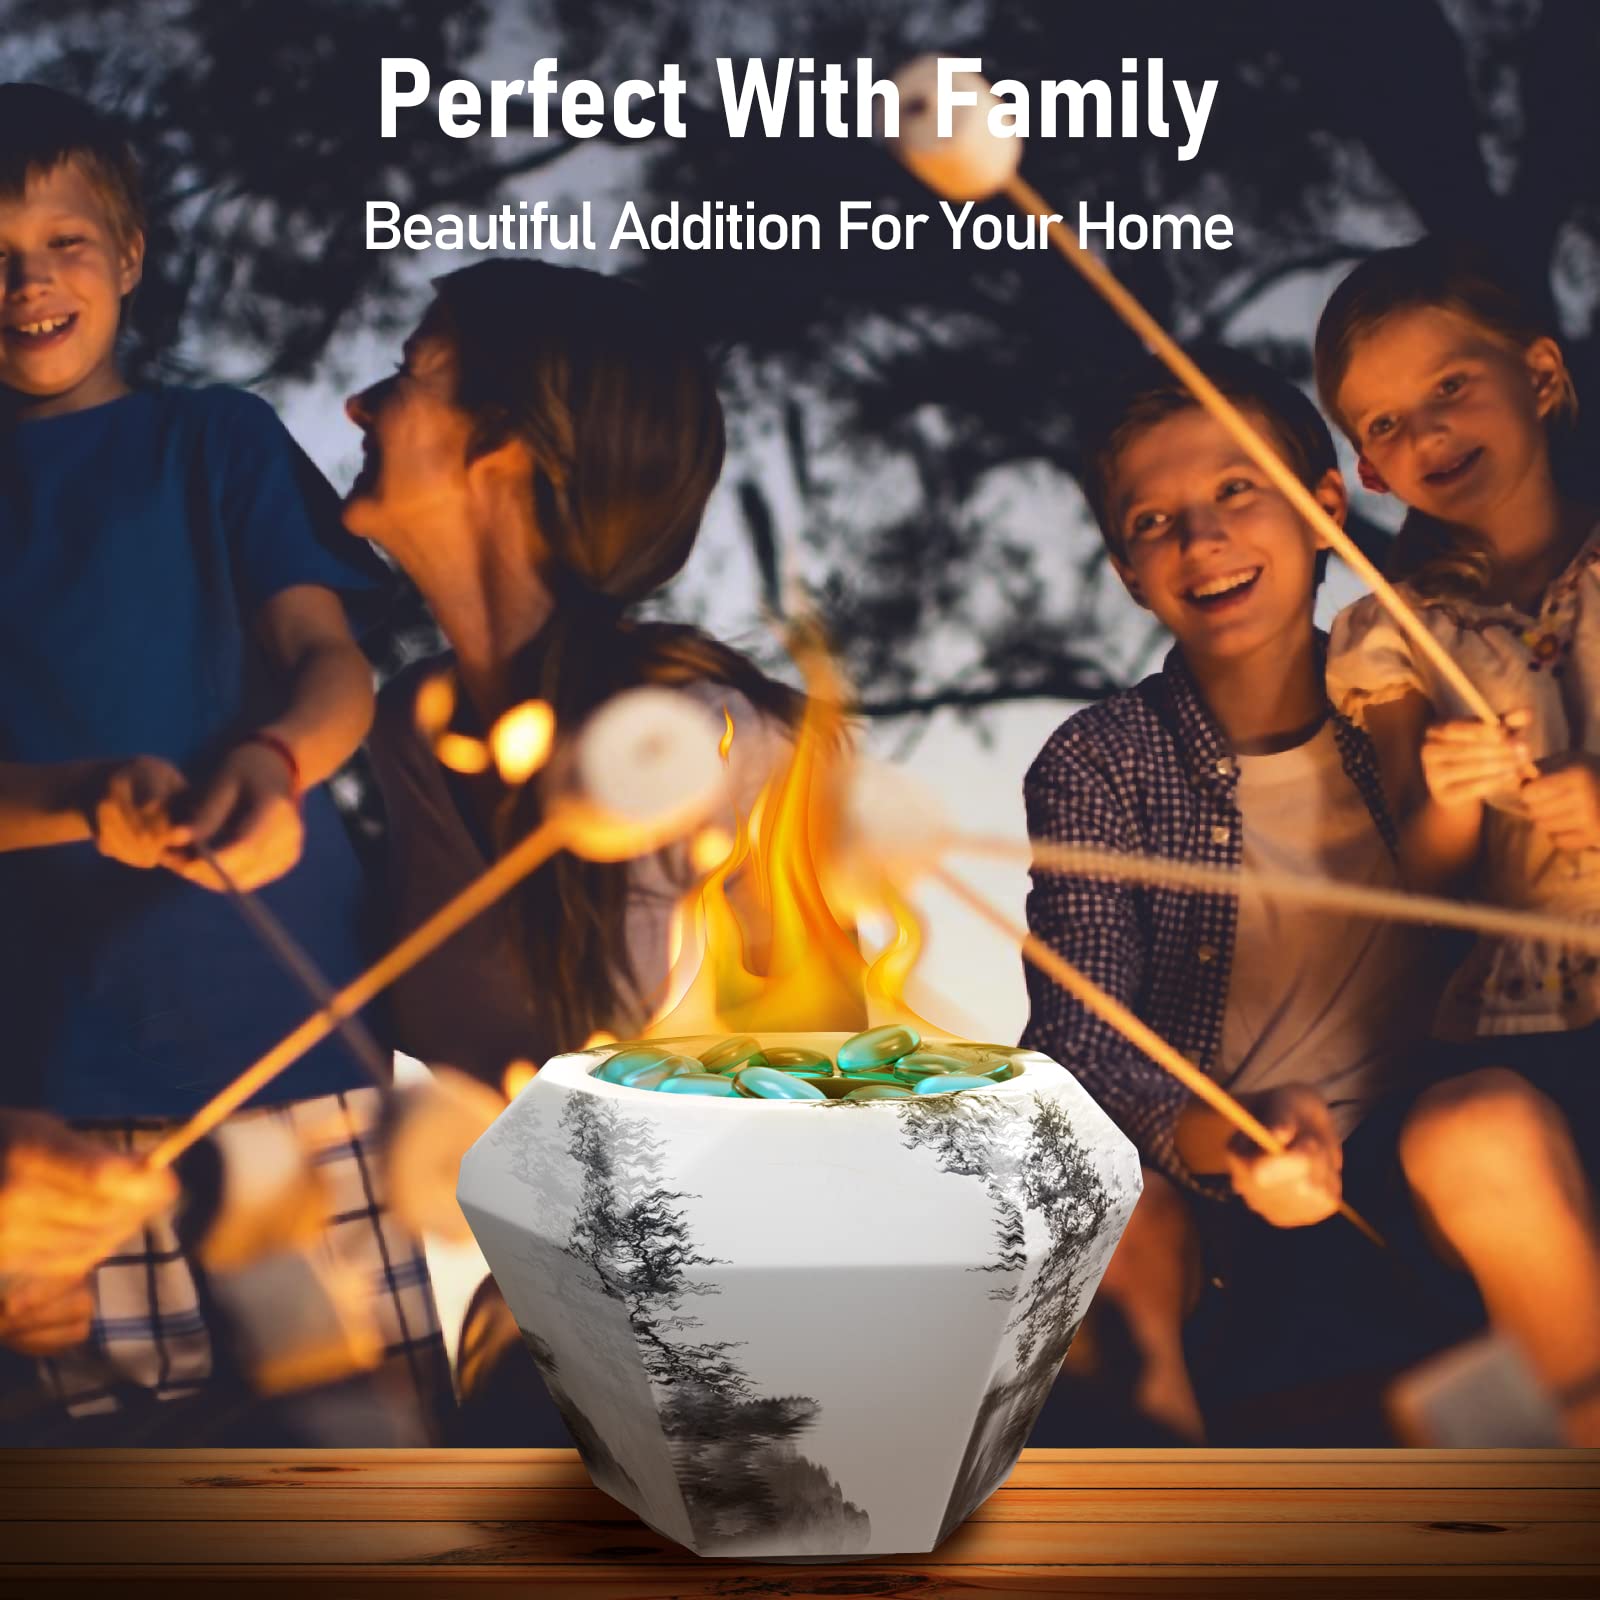 Coobest Tabletop Fire Pit, Small Table Top Firepit, Smokeless Fire Pit Bowl for Table, Tabletop Fire Pit Bowl for Smores Maker, Garden Mini Fire Pit for Table, Indoor Fireplace Decor